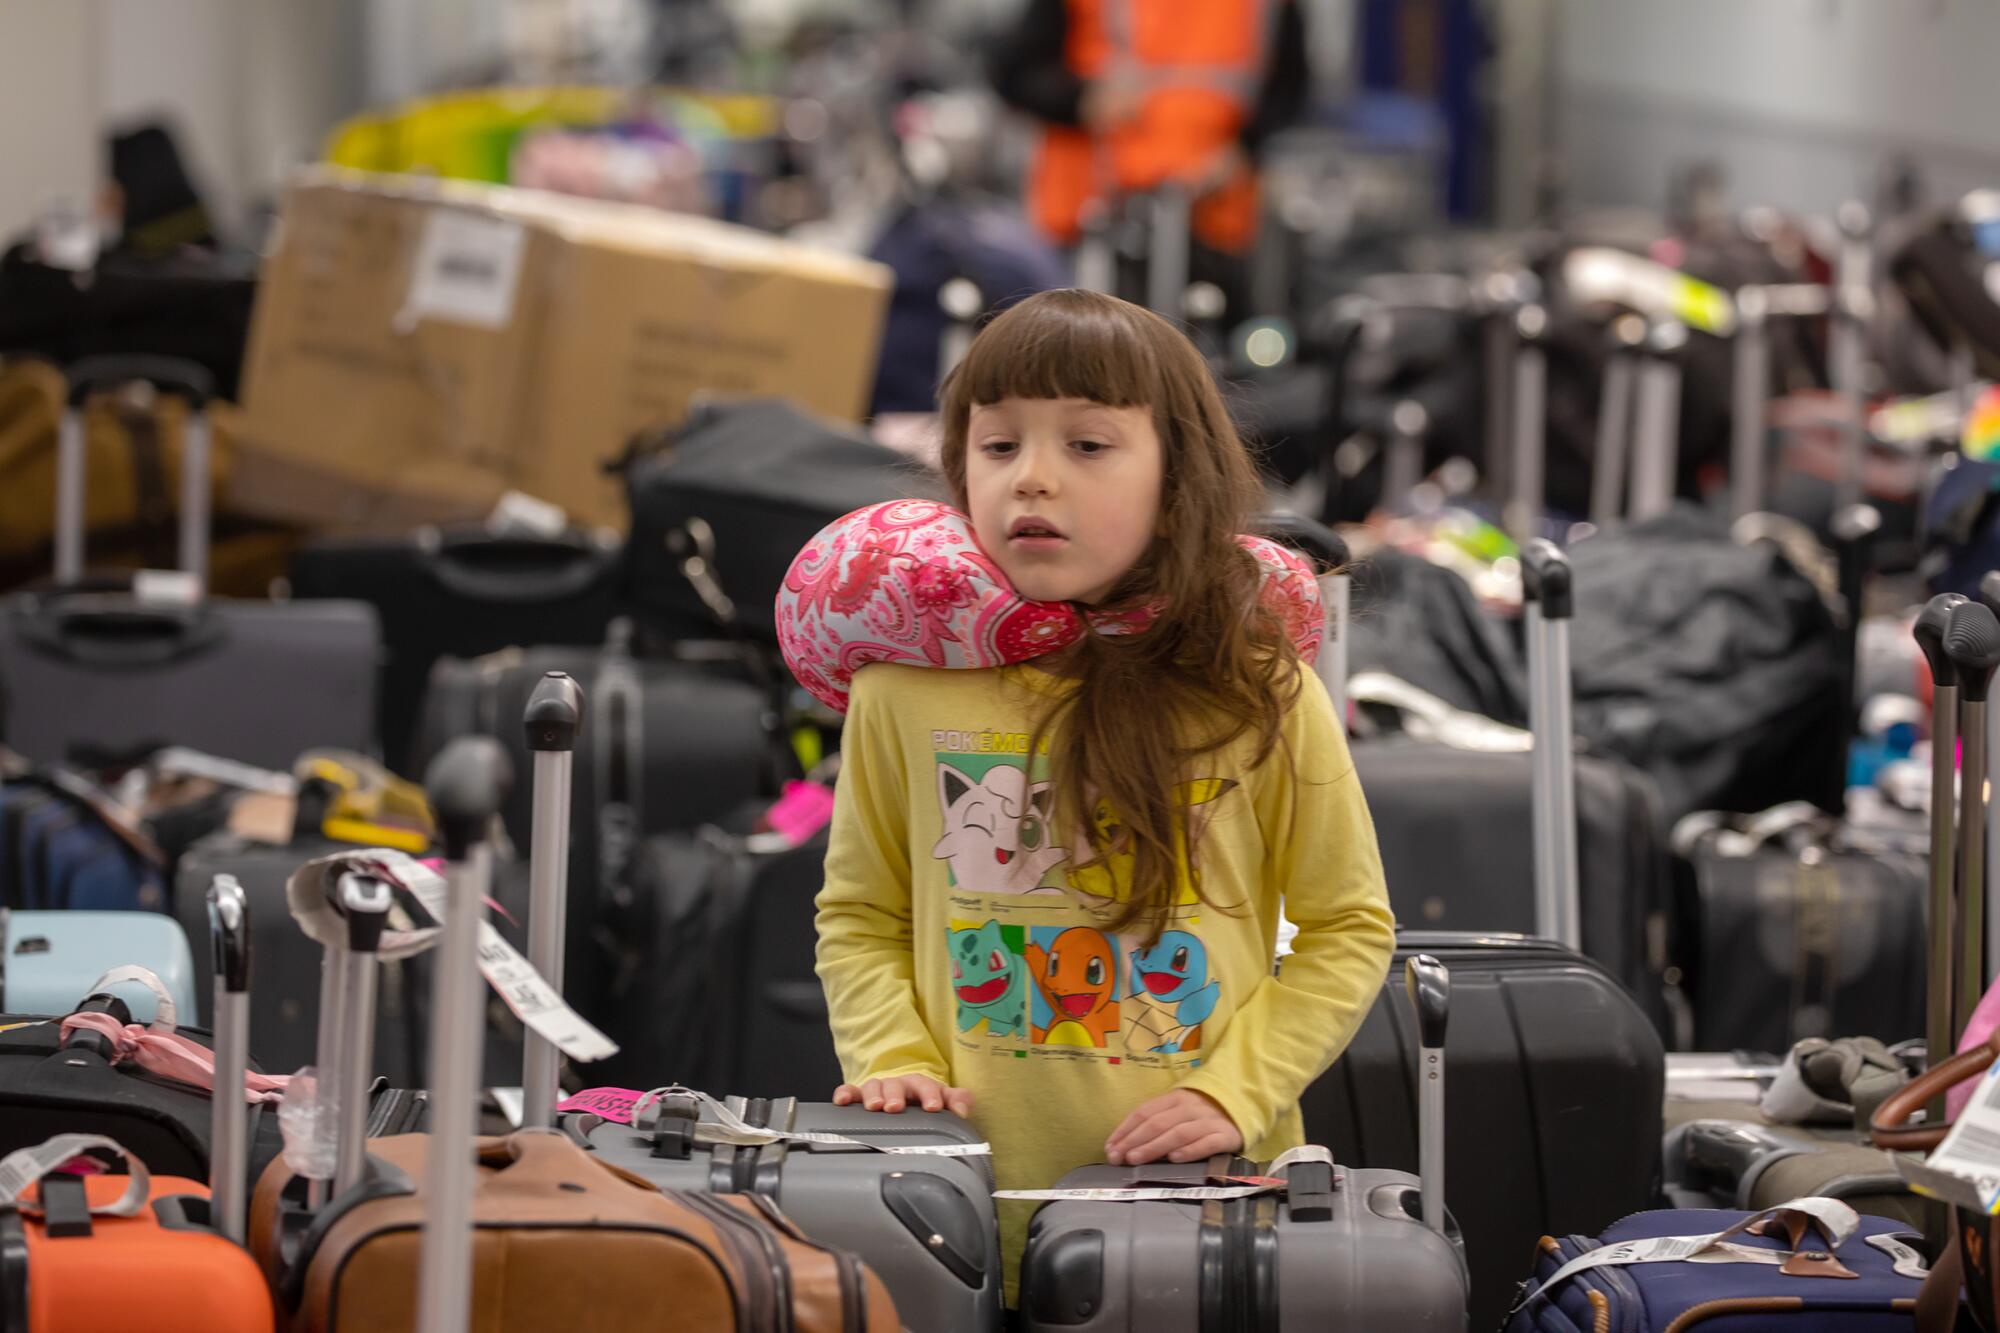 Ryker Salazar, 5, arriving from Dallas, searches for luggage among the sea of bags accumulated at baggage claim at LAX 